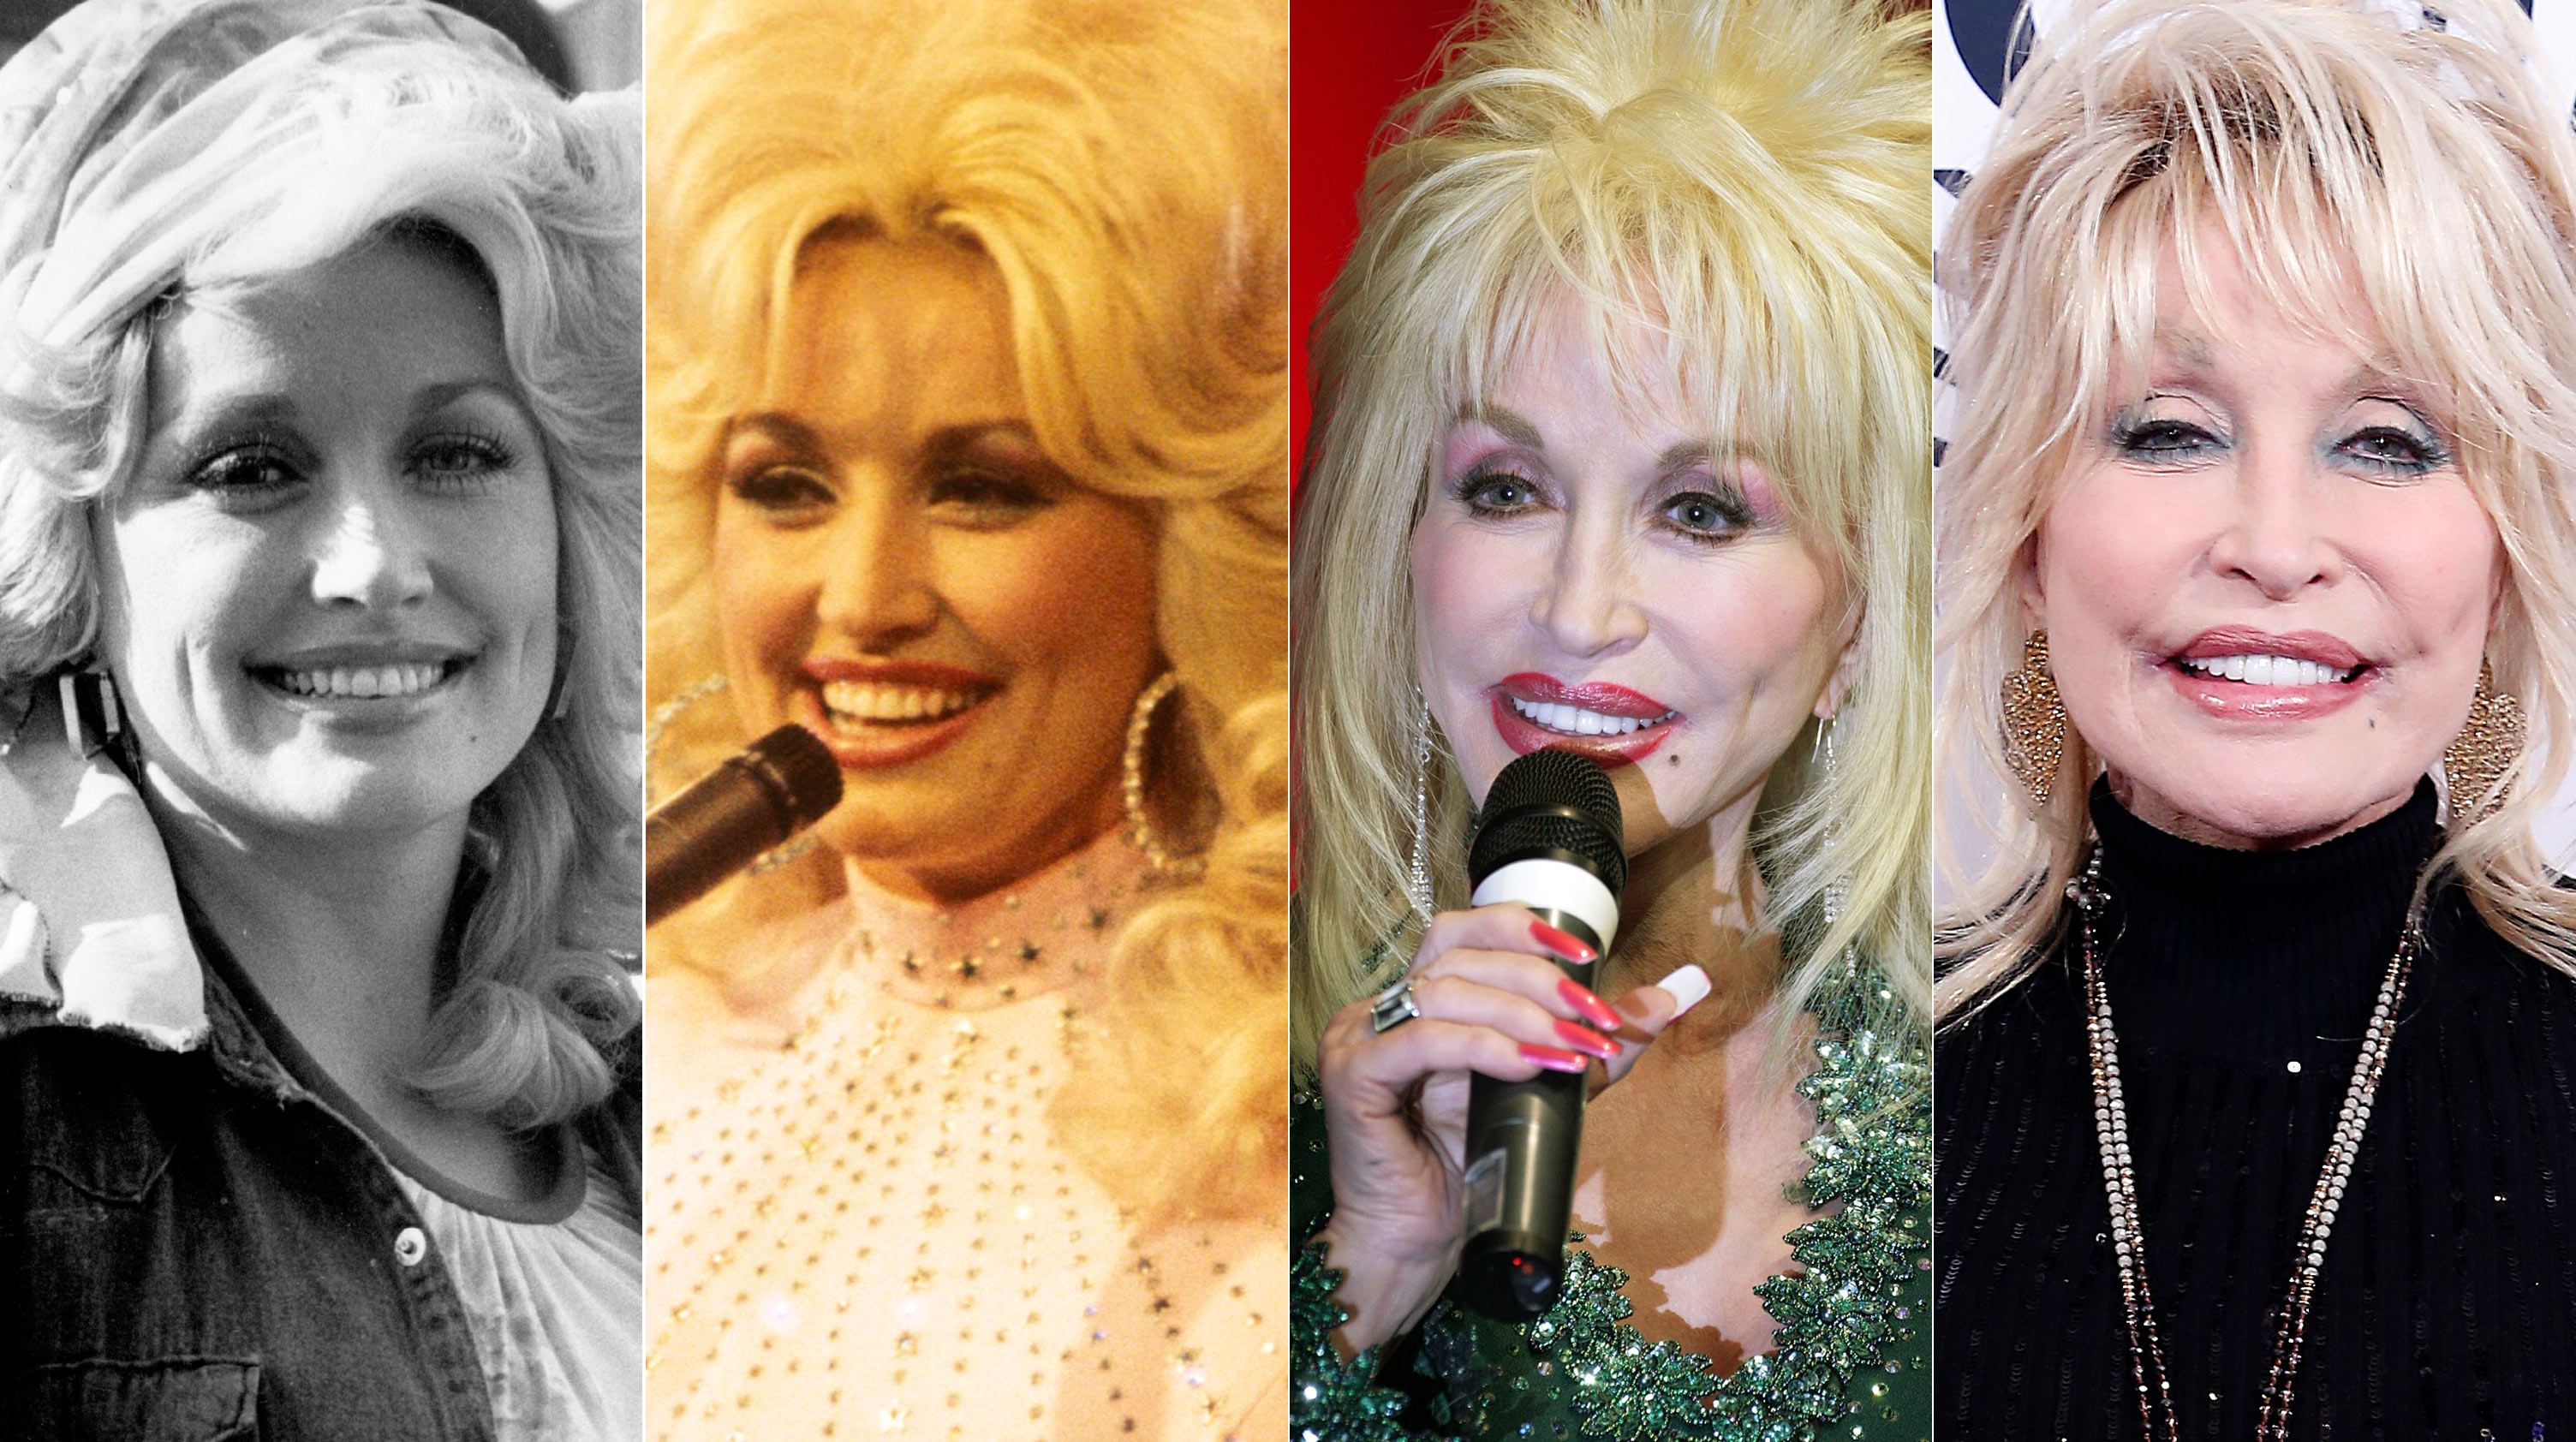 Dolly Parton Plastic Surgery Before & After Photos | Heavy.com